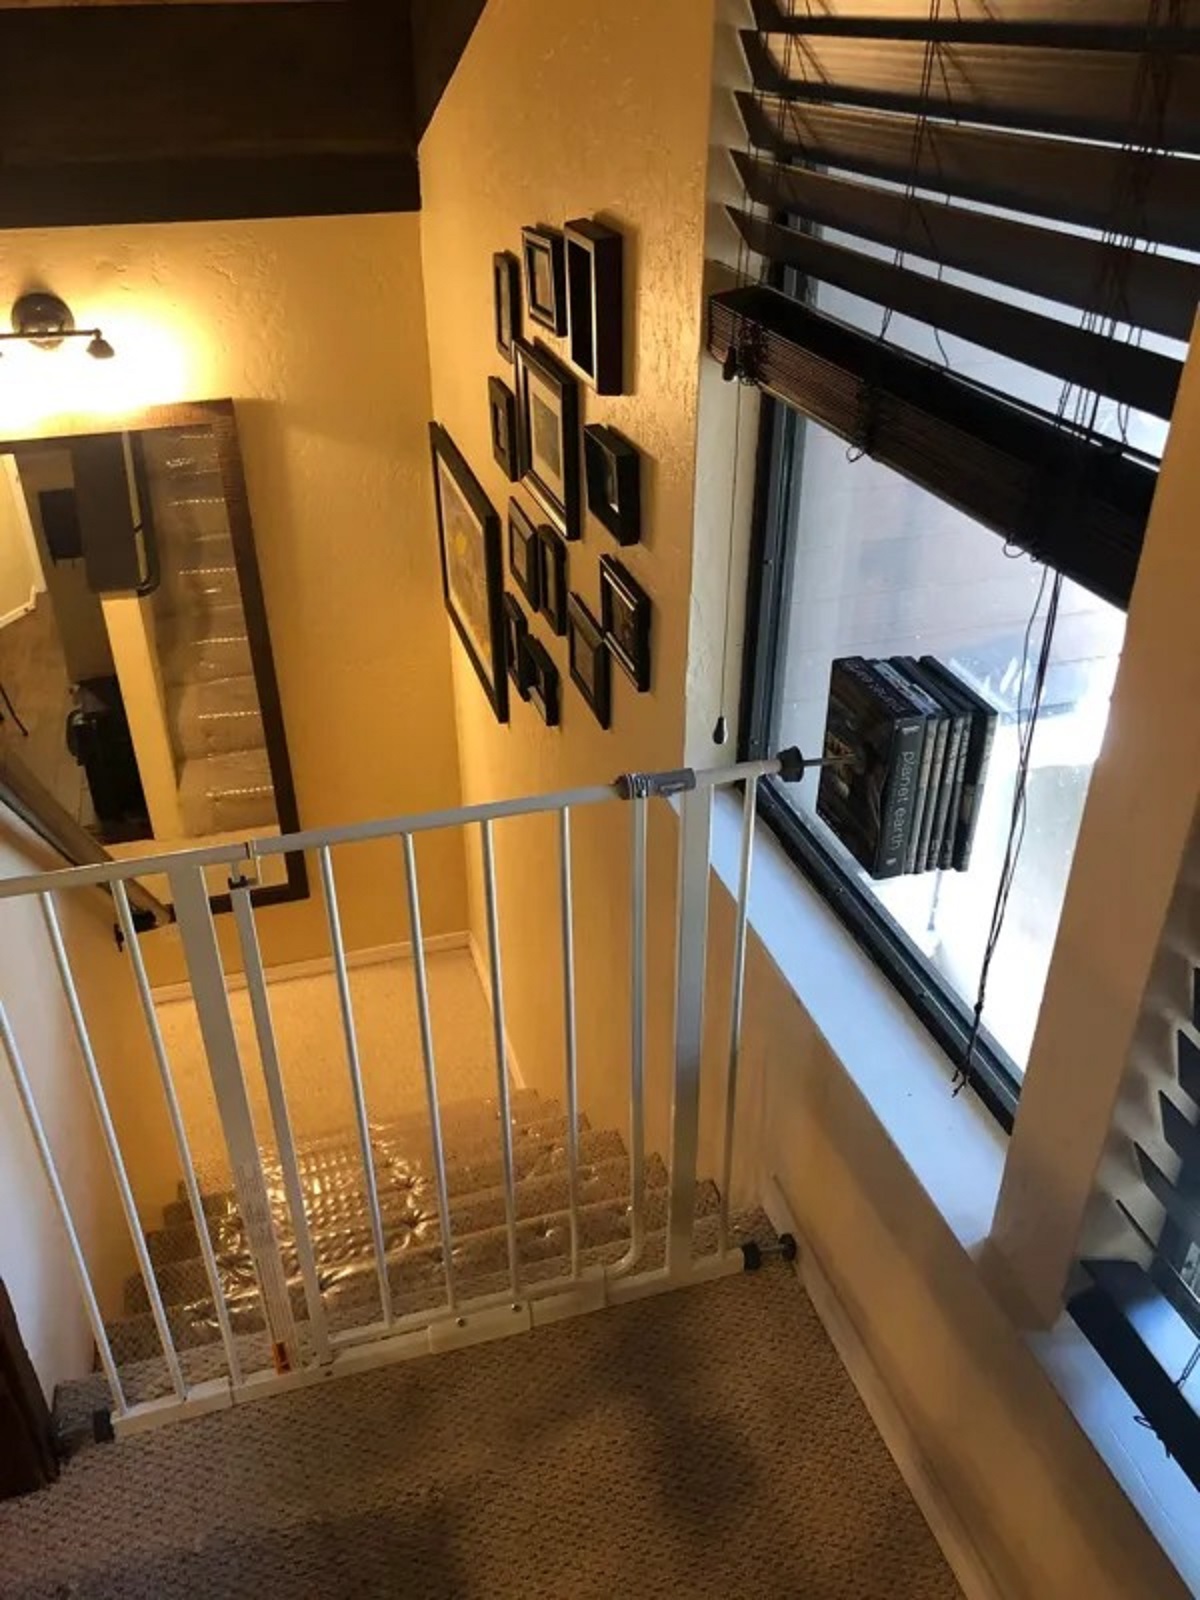 My Airbnb assured me they have a “very safe” baby gate.